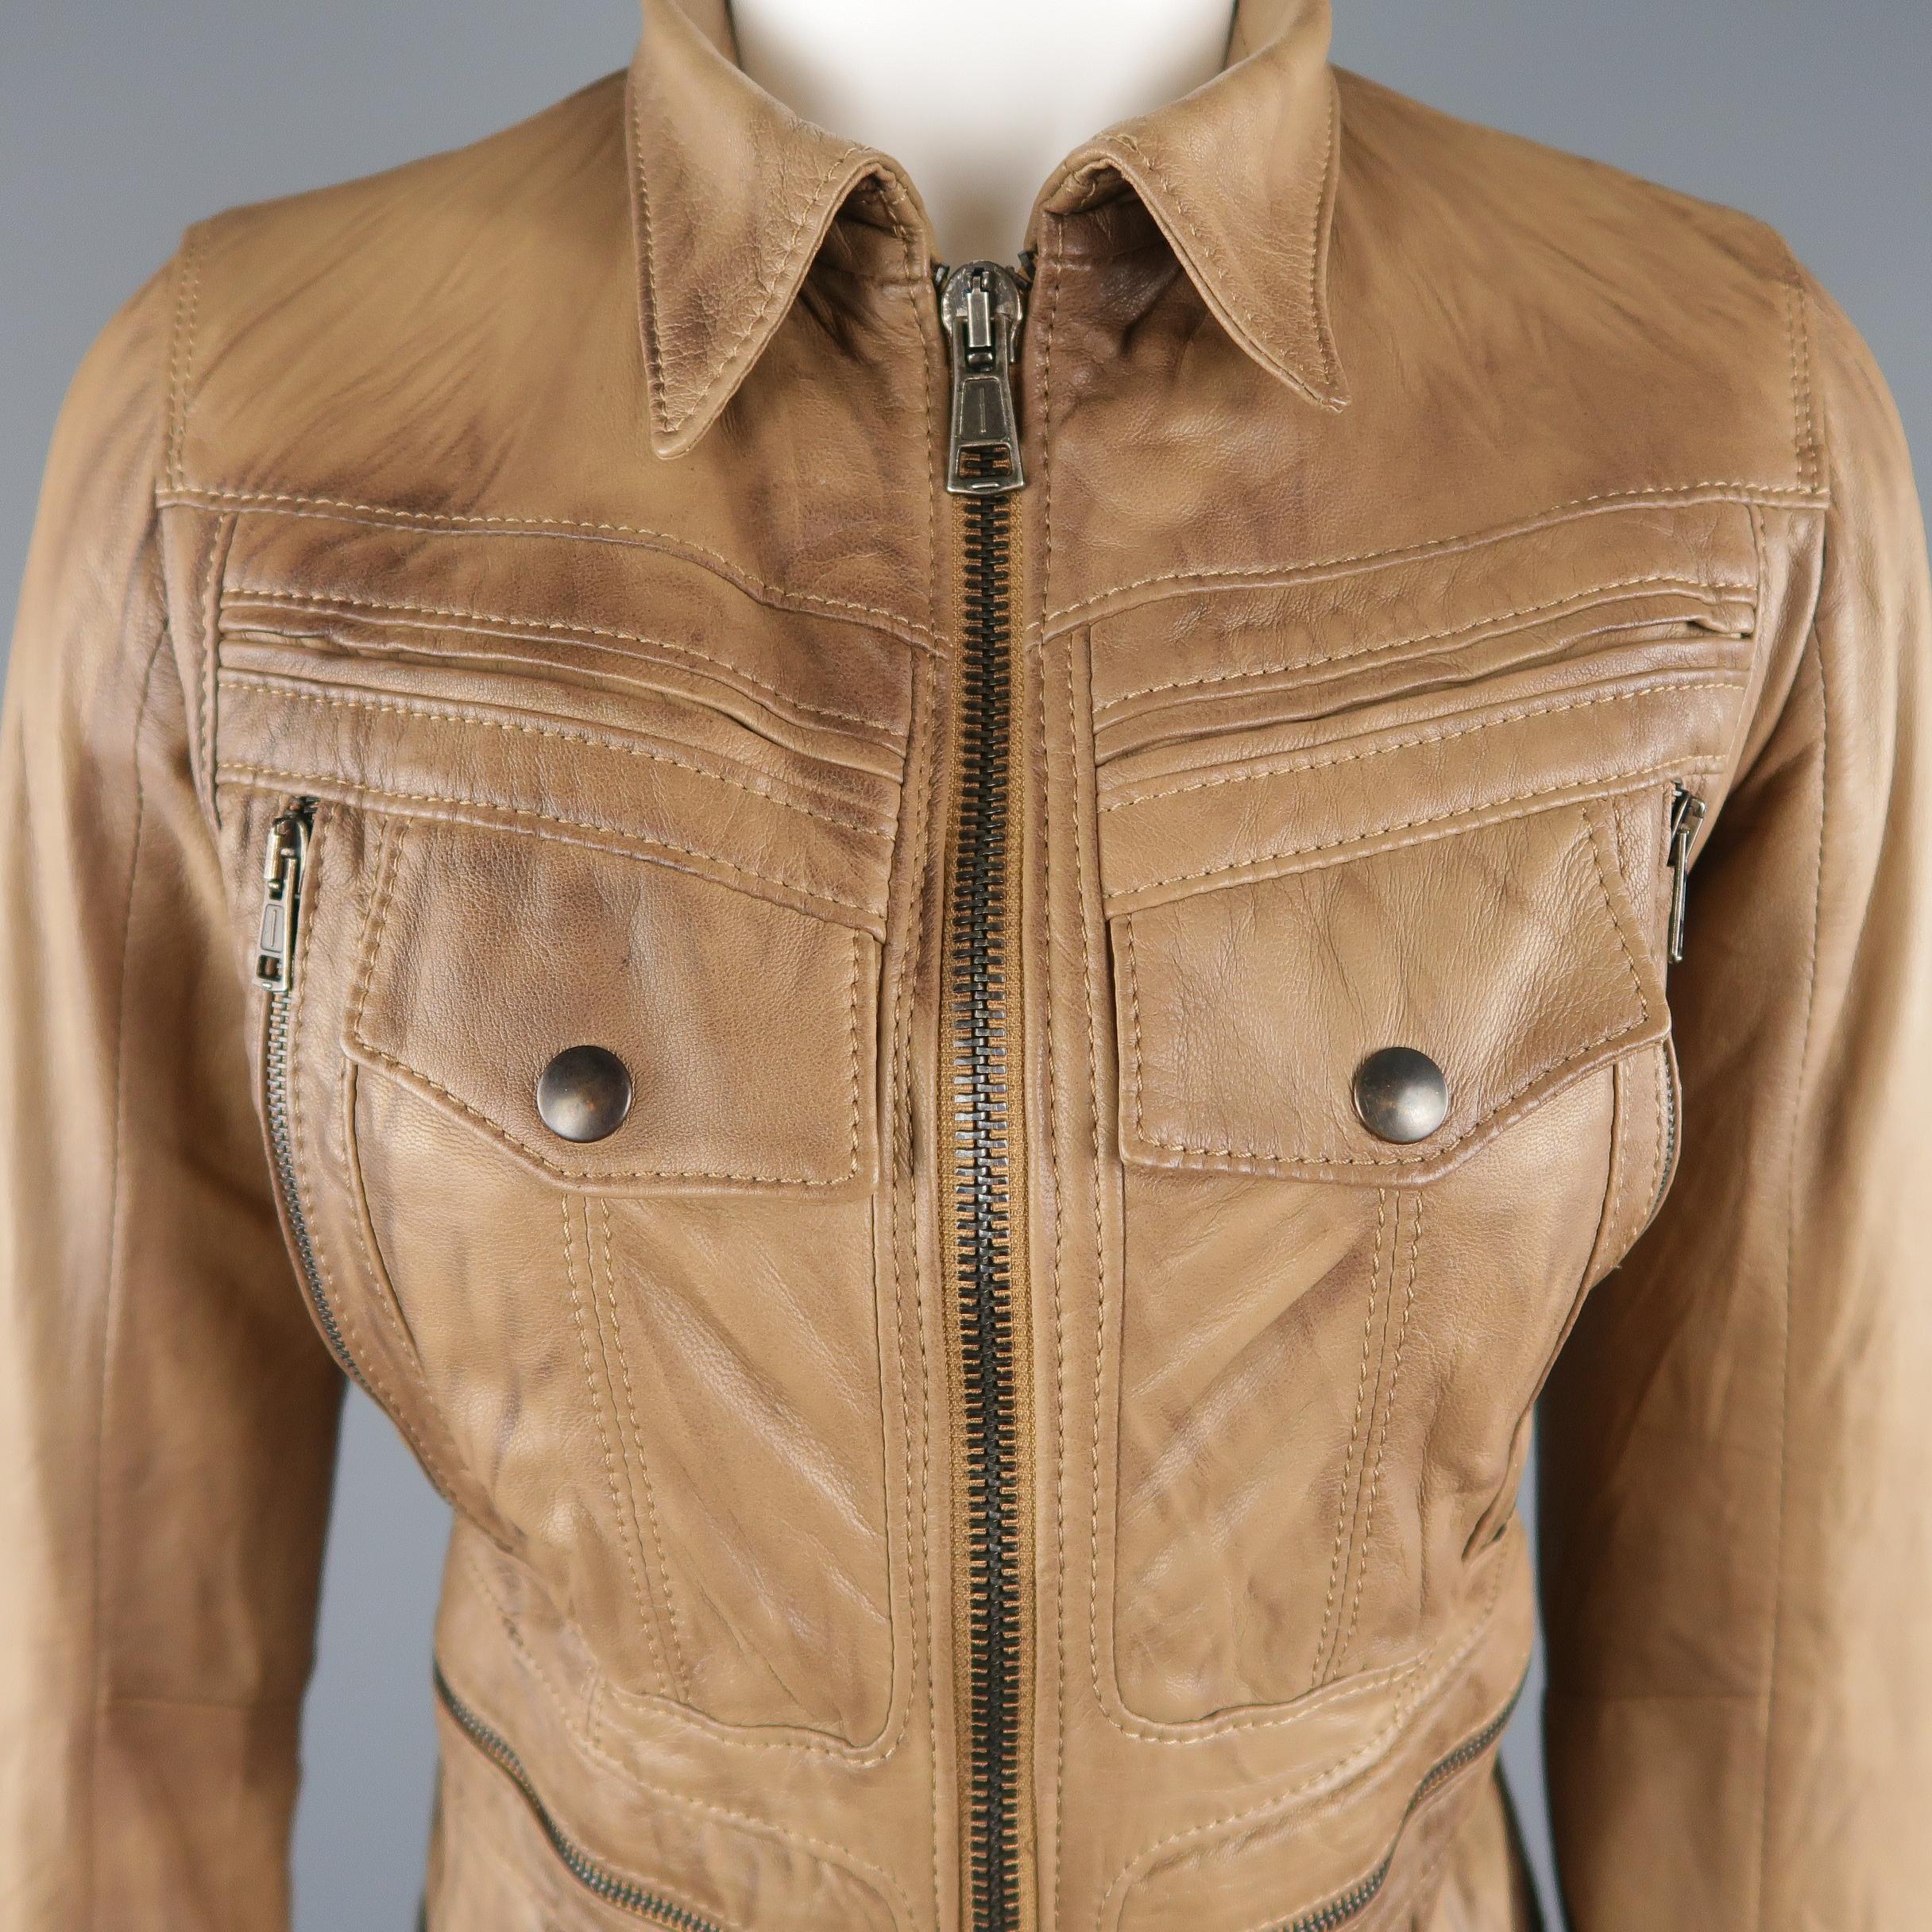 S.W.O.R.D. jacket comes in tan distressed effect leather with a pointed collar, double zip front, snap cuffs, and zip pockets. Made in Italy.
 
Excellent Pre-Owned Condition.
Marked: XS
 
Measurements:
 
Shoulder: 13 in.
Bust: 34 in.
Sleeve: 23